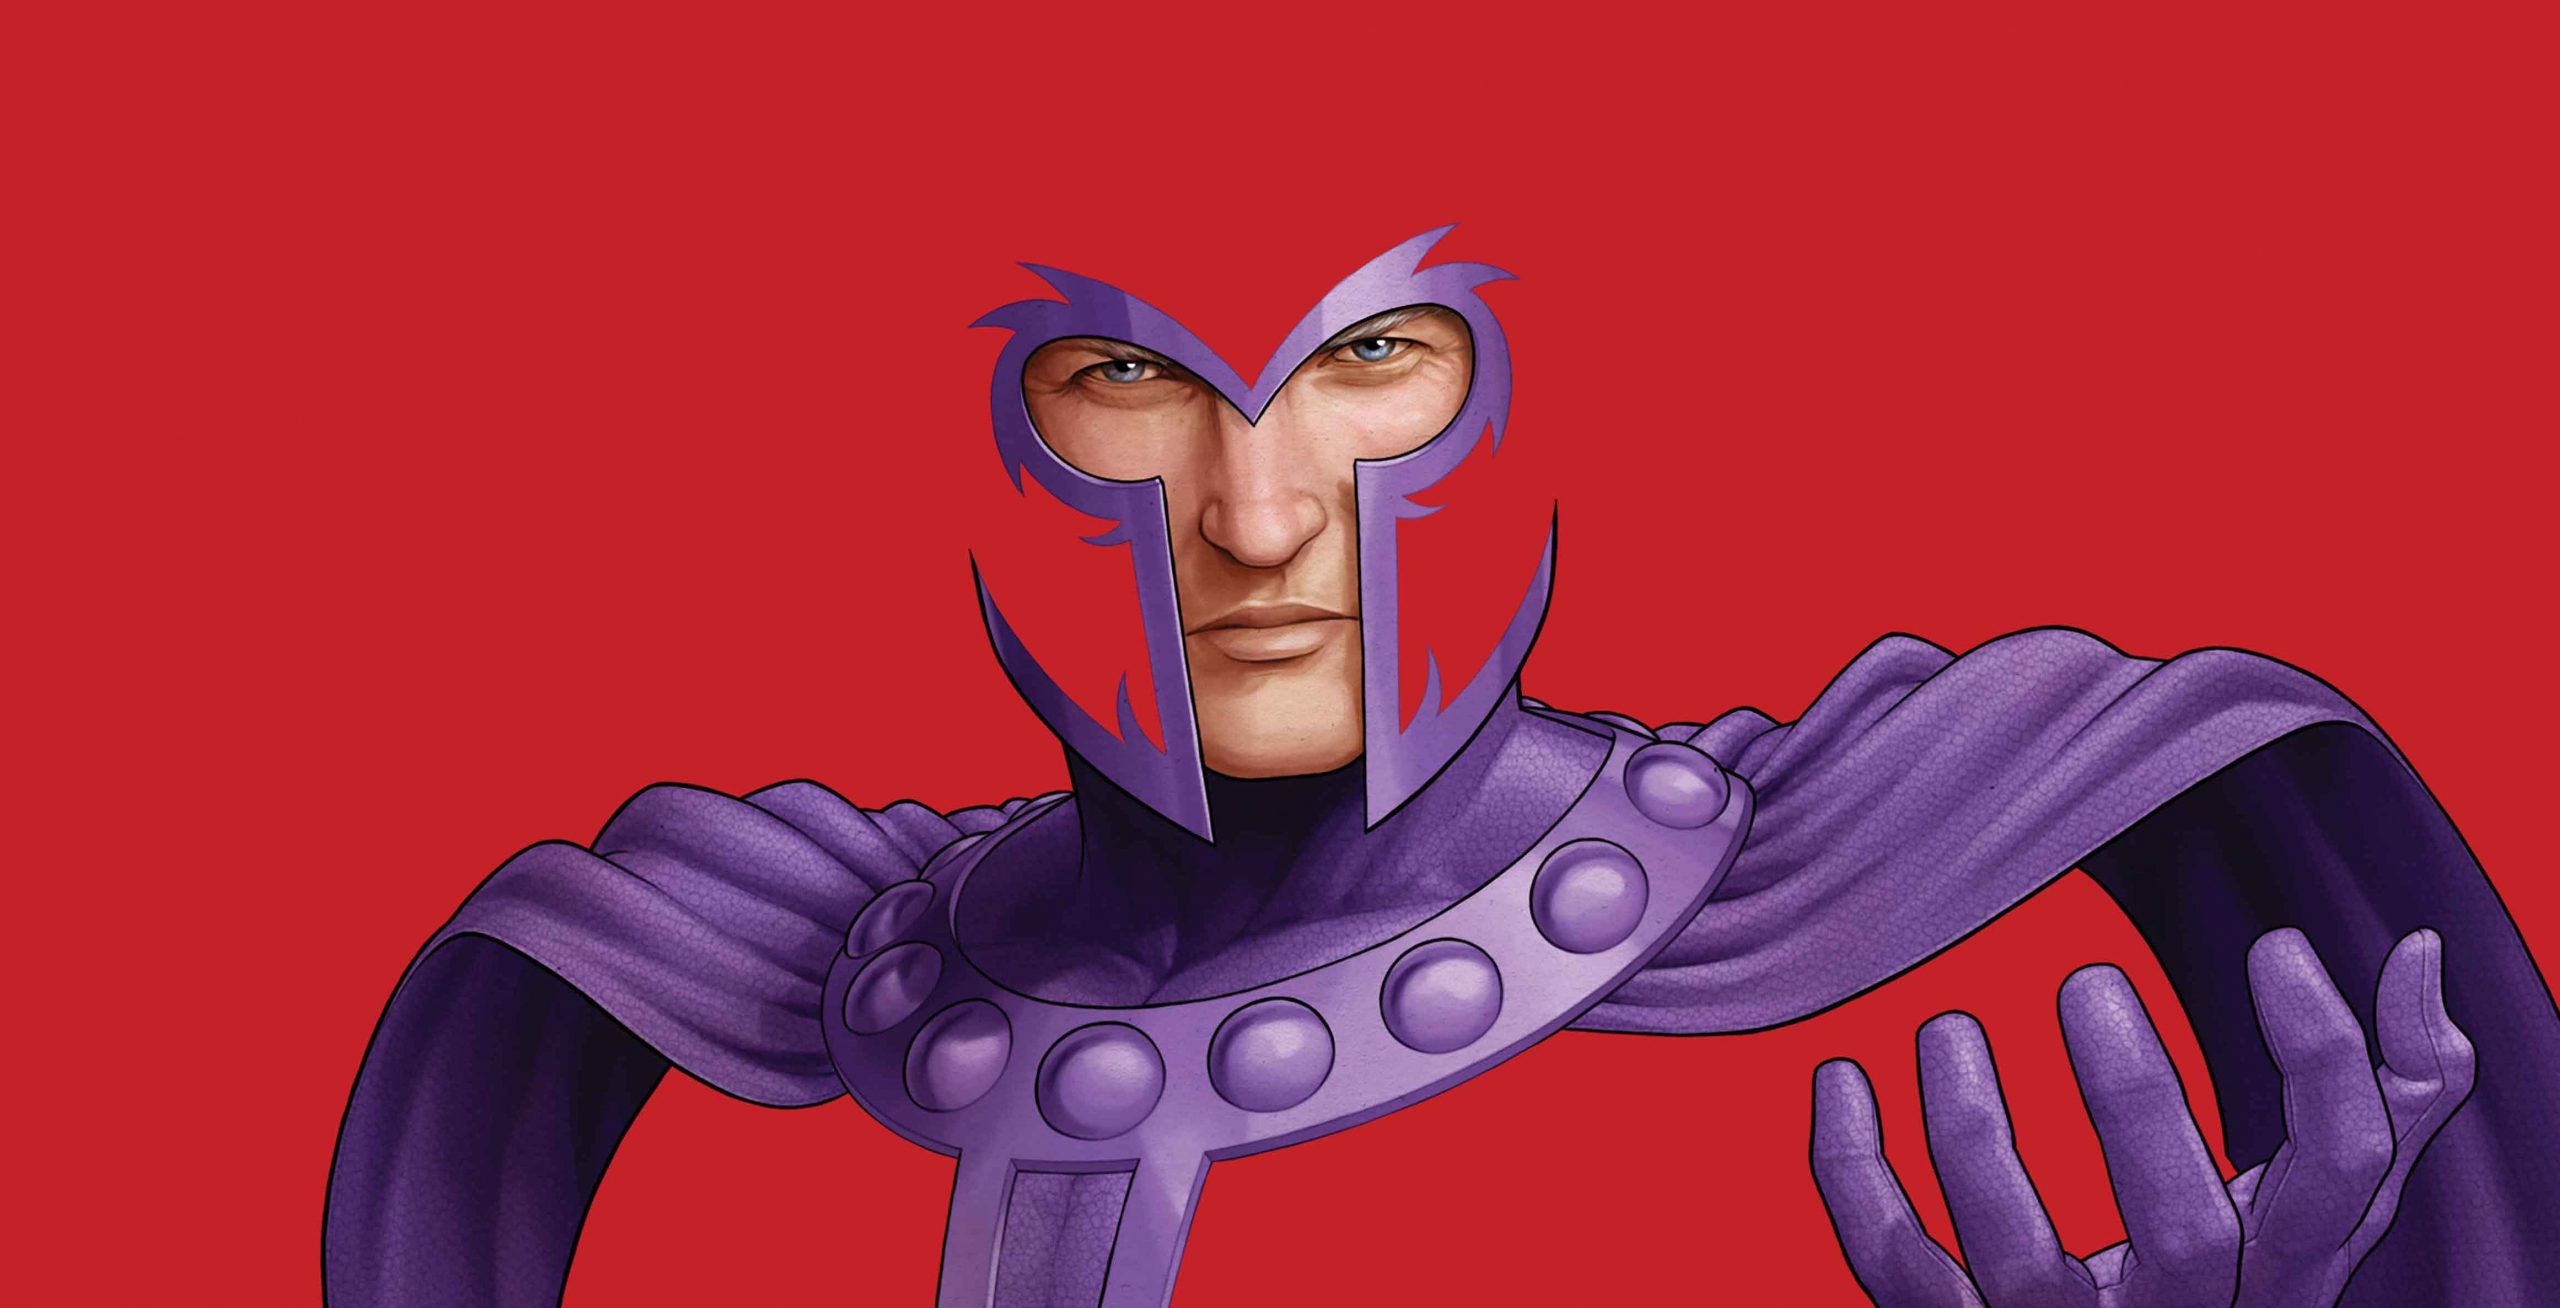 New negative space 'Resurrection of Magneto' #1 cover revealed